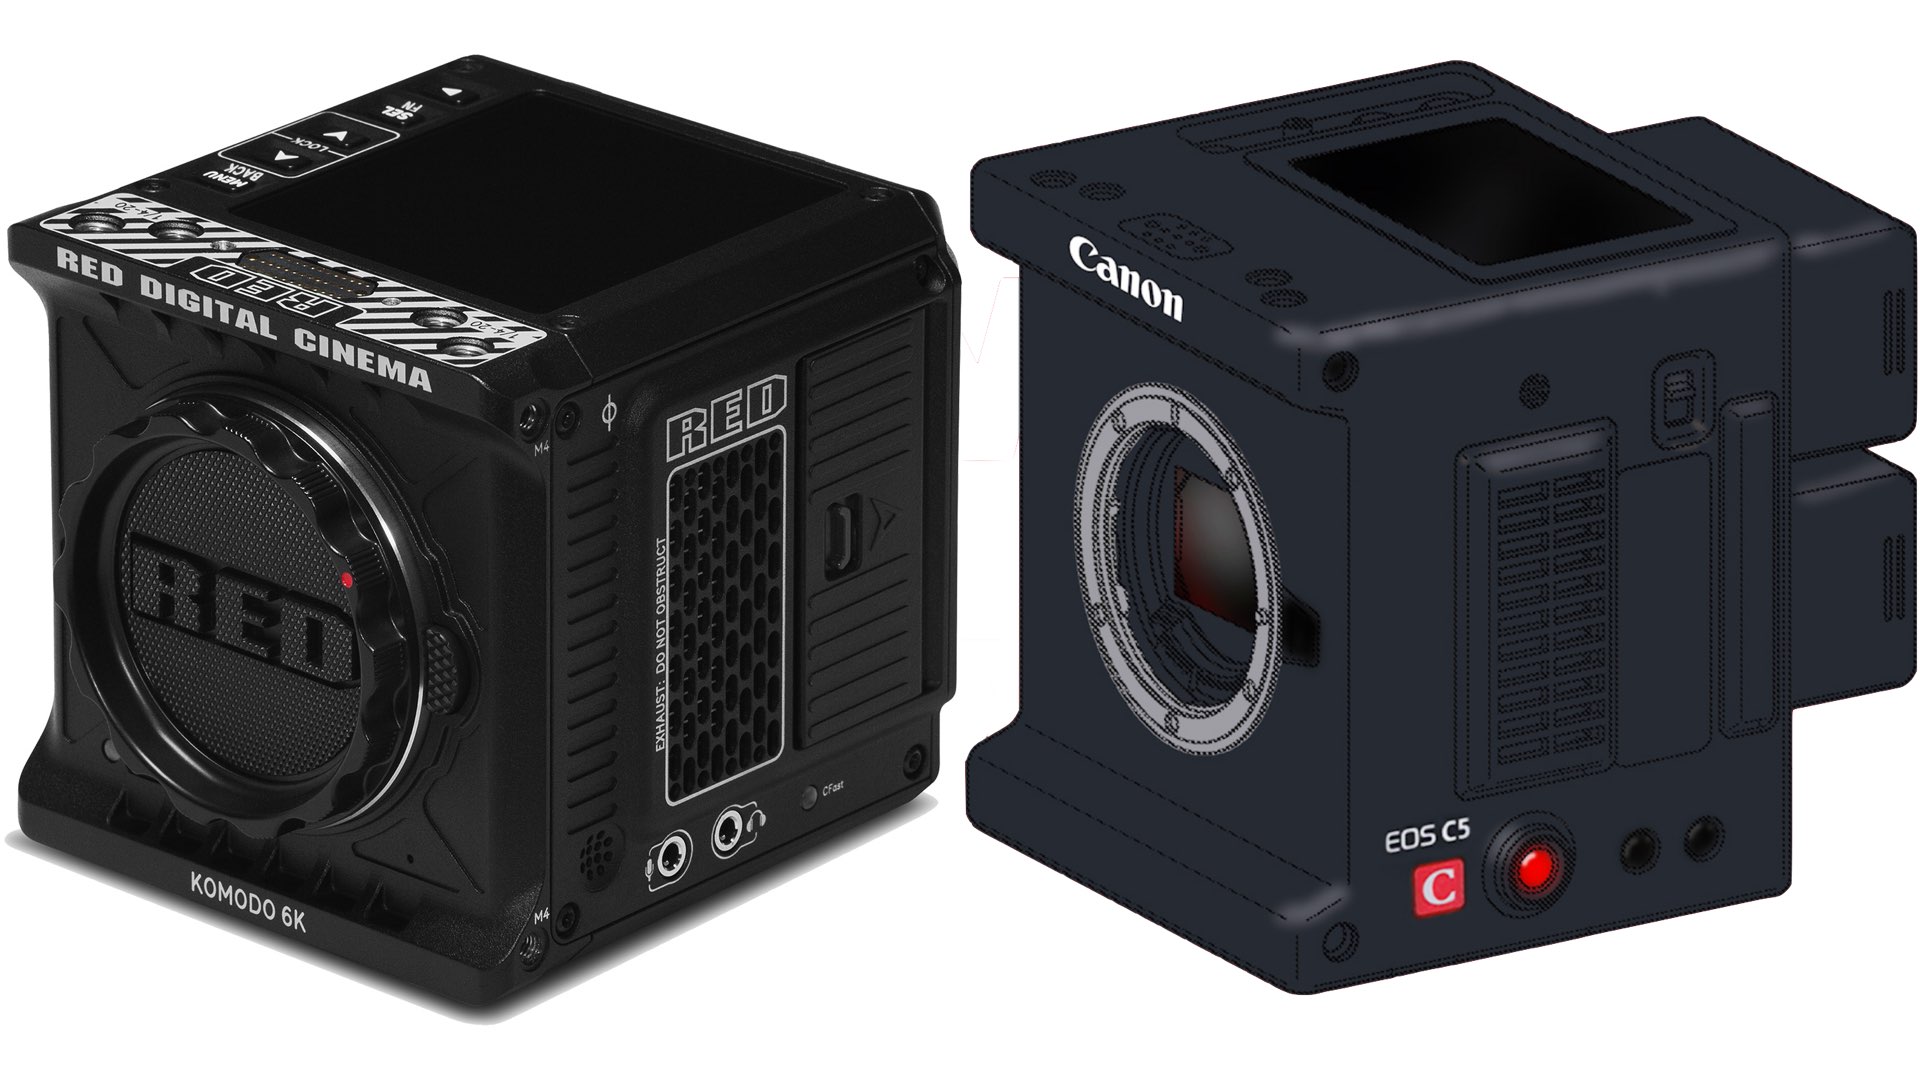 Canon's patent application: New high-end boxy cinema camera: Copycat to the RED Komodo. Image rendering: Chung Dha